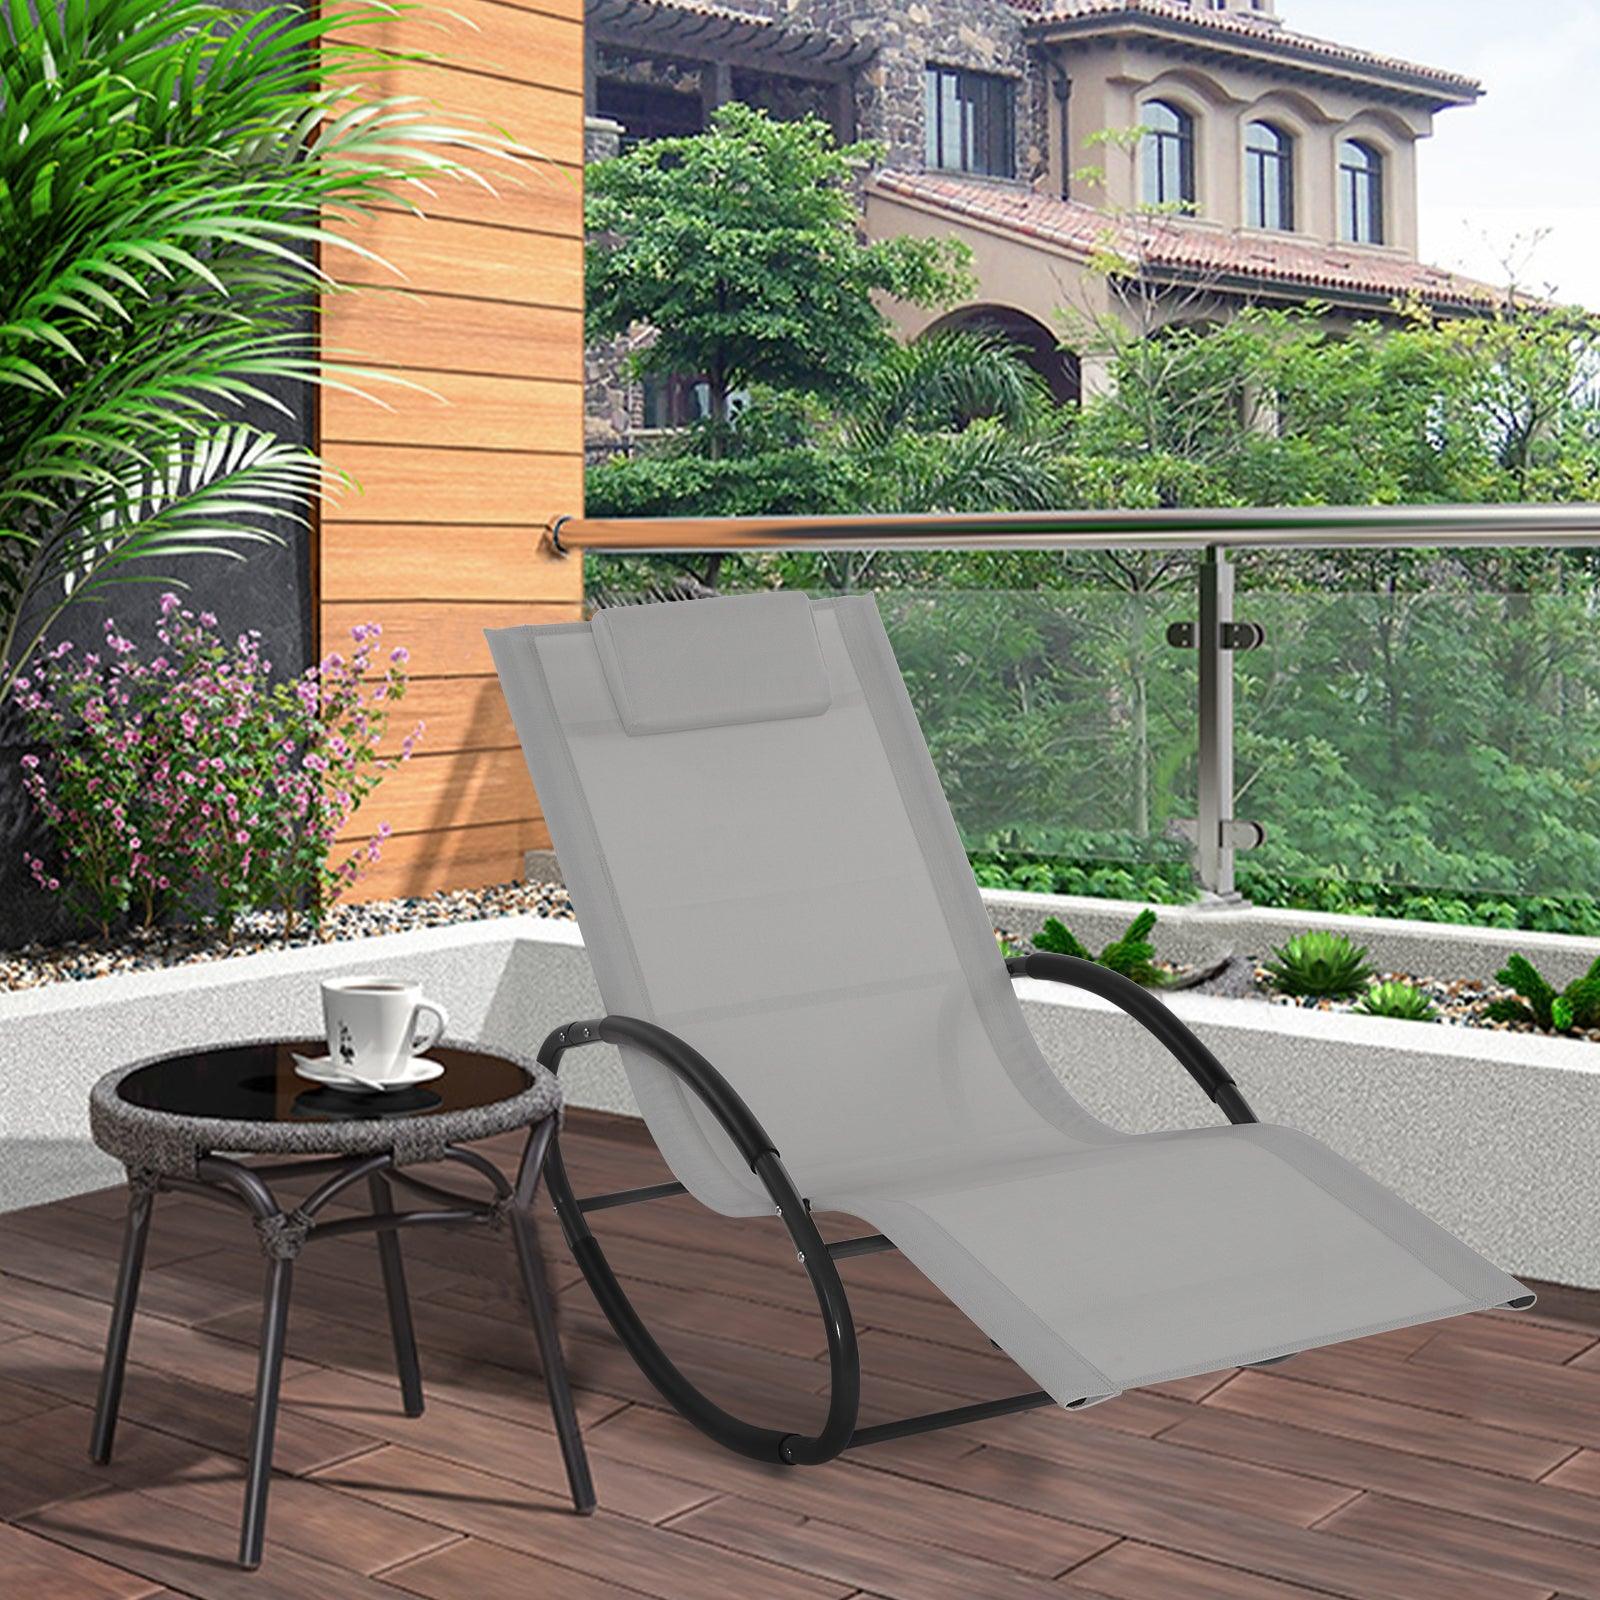 Outdoor Rocking Chair / Lounger / Recliner for Garden, Patio, Decking, Balcony - Charming Spaces